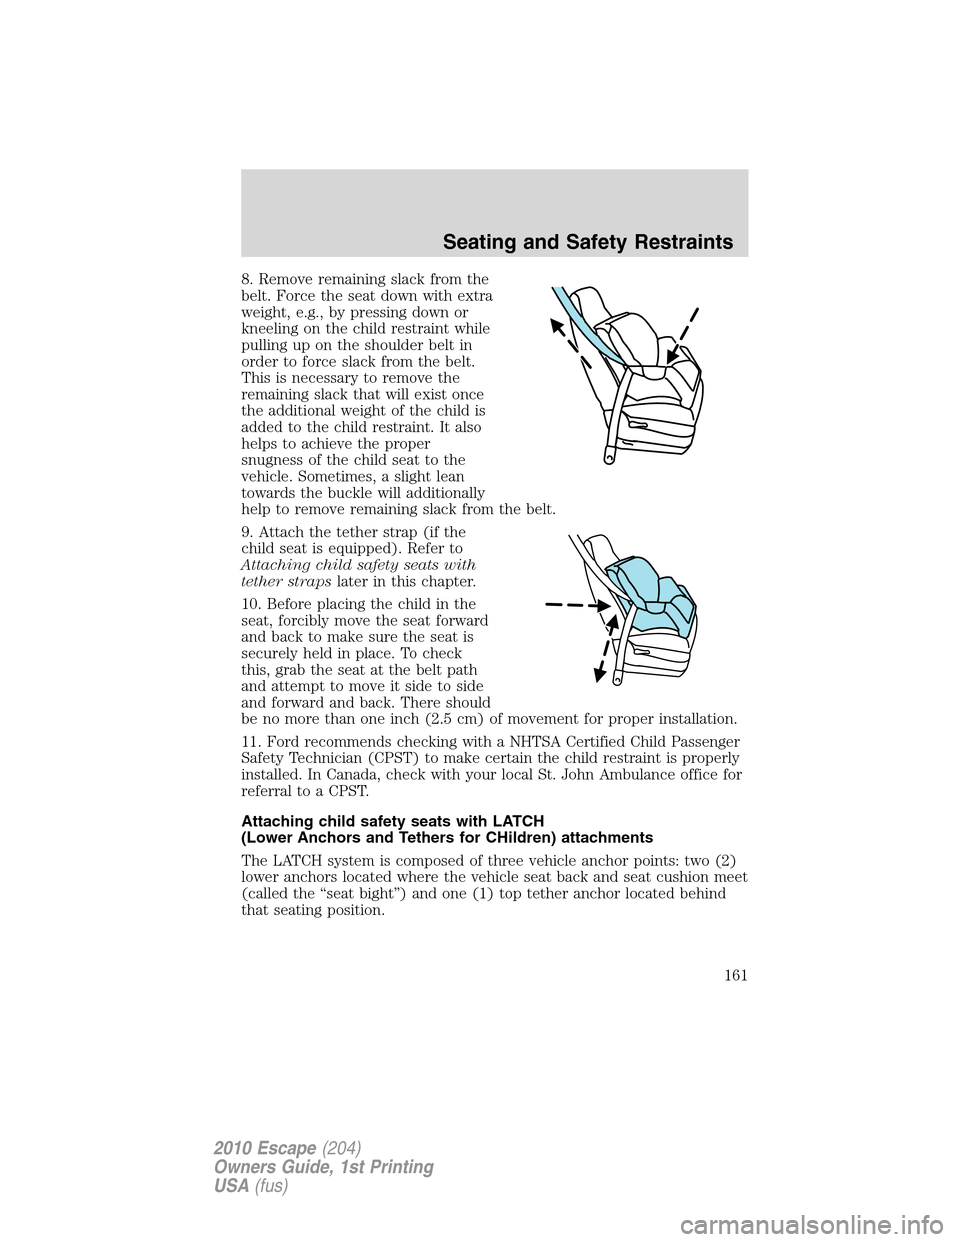 FORD ESCAPE 2010 2.G Owners Manual 8. Remove remaining slack from the
belt. Force the seat down with extra
weight, e.g., by pressing down or
kneeling on the child restraint while
pulling up on the shoulder belt in
order to force slack 